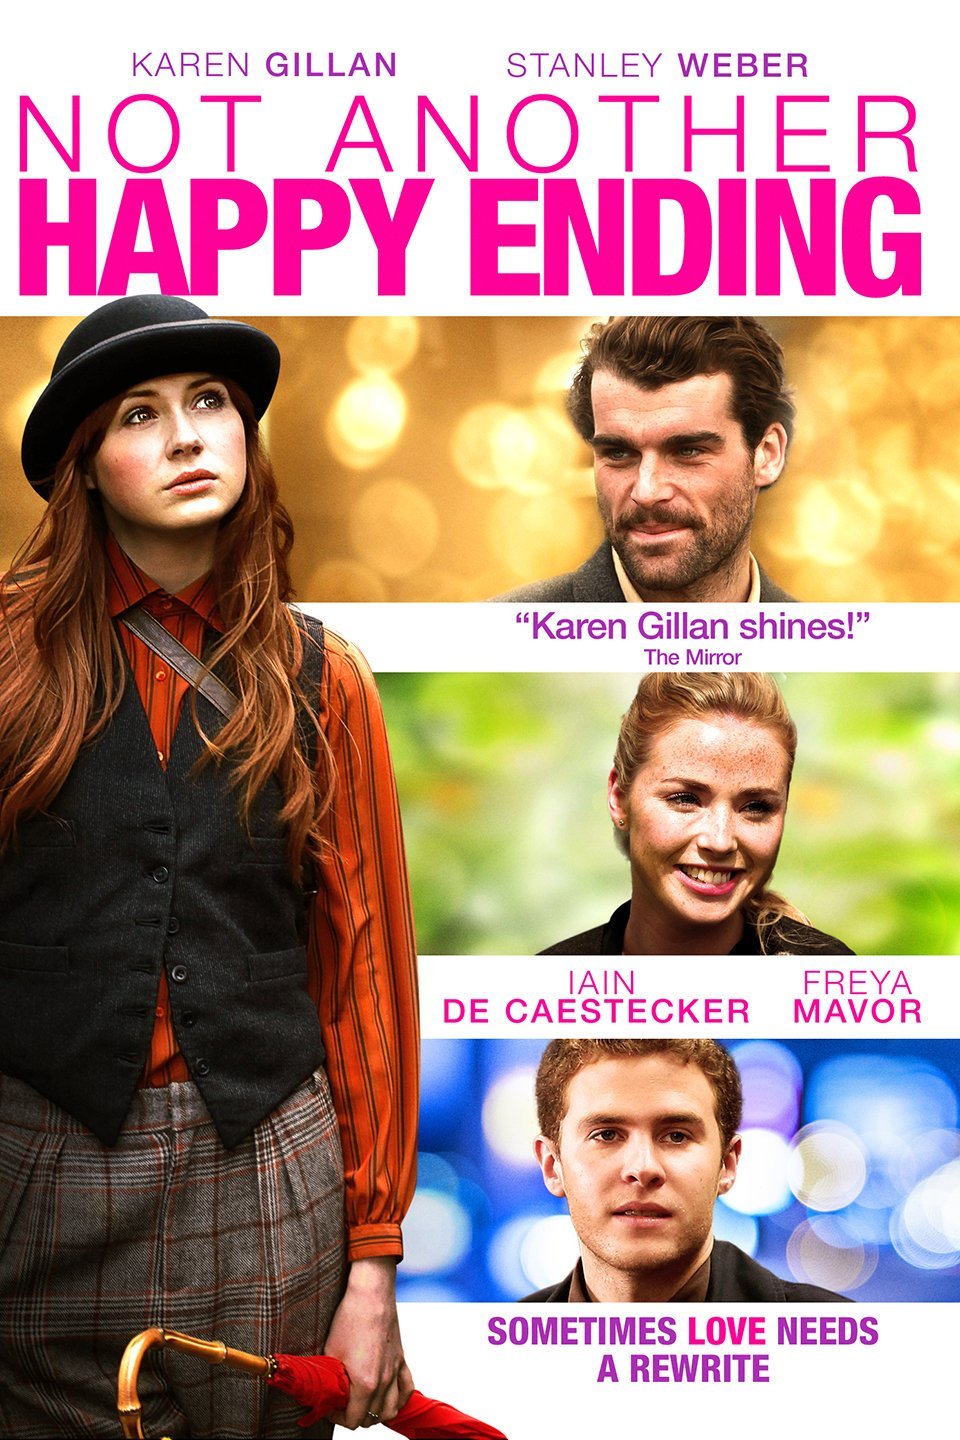 Poster of the movie Not Another Happy Ending